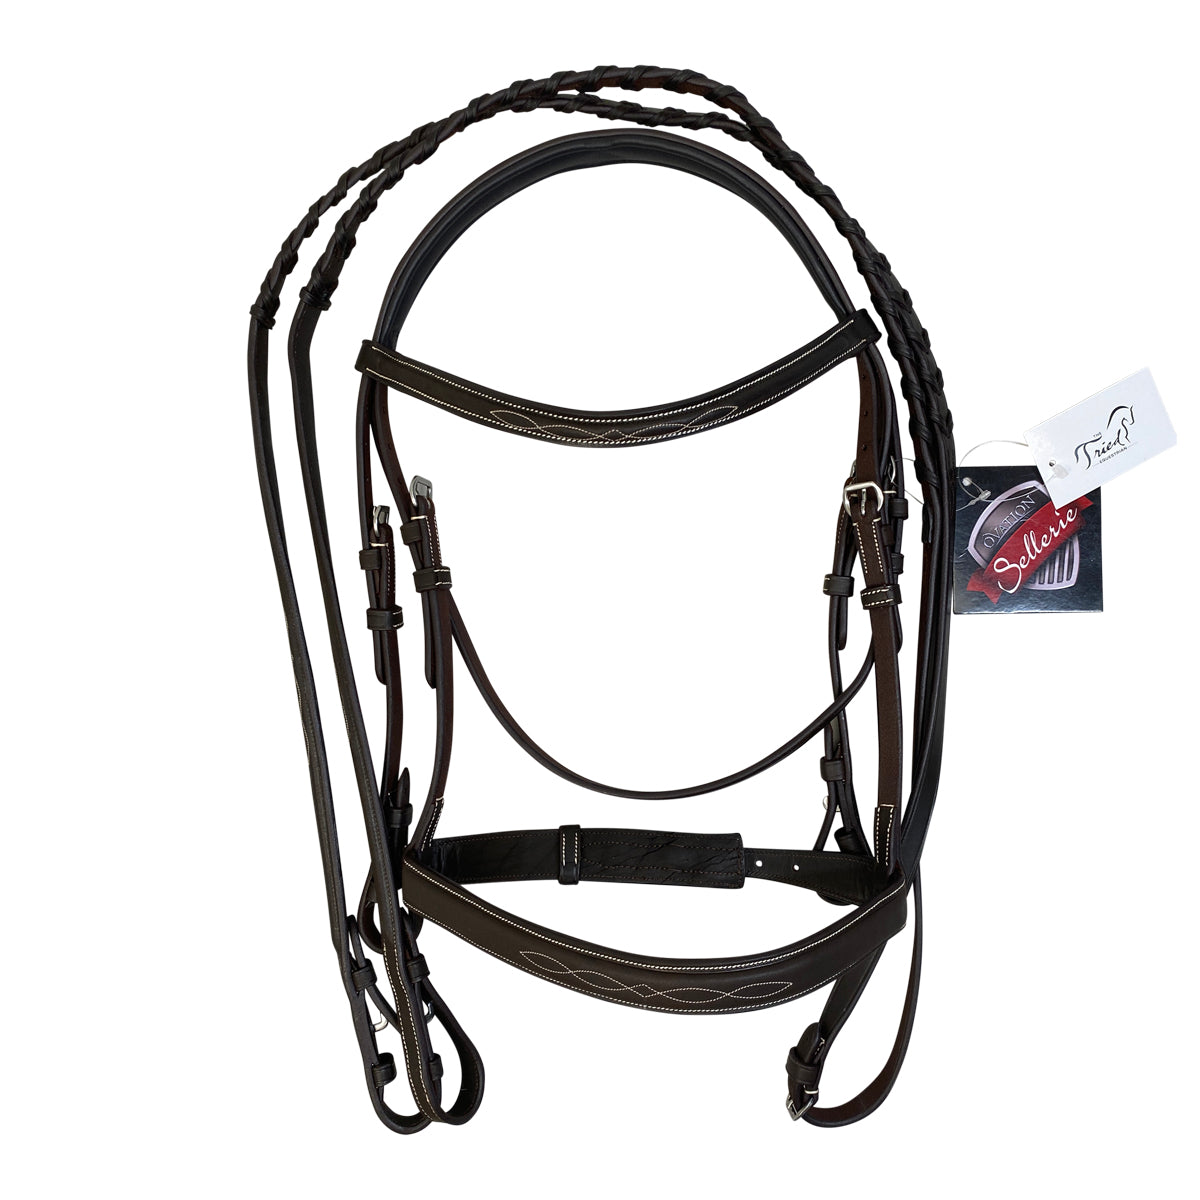 Ovation Classic 'Fancy Stitched Wide Nose Comfort Crown' Bridle in Brown - Oversize